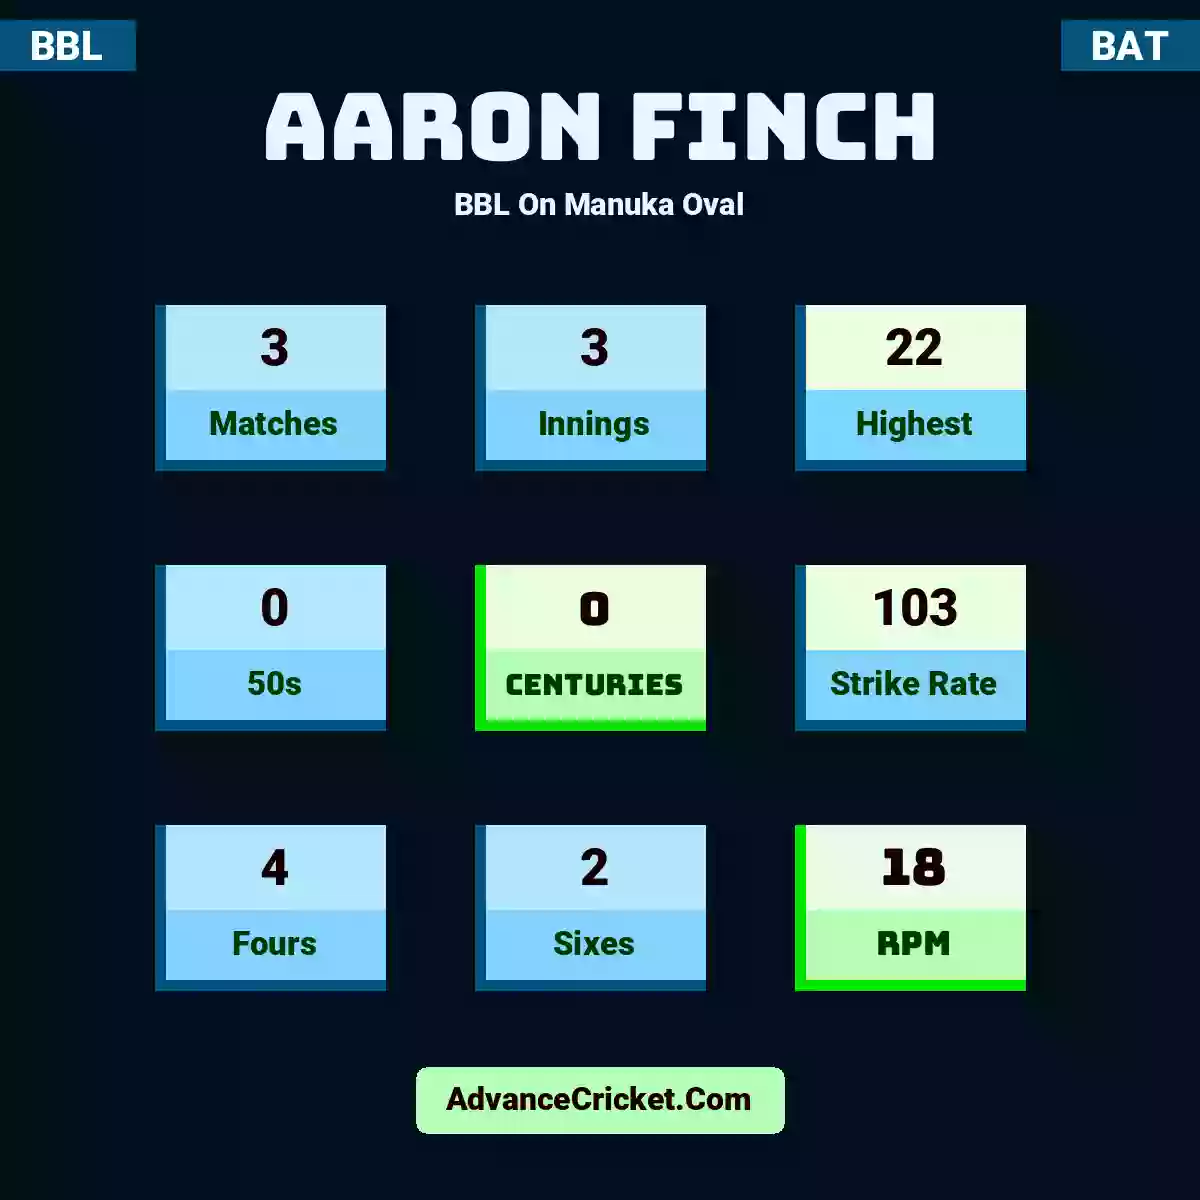 Aaron Finch BBL  On Manuka Oval, Aaron Finch played 3 matches, scored 22 runs as highest, 0 half-centuries, and 0 centuries, with a strike rate of 103. A.Finch hit 4 fours and 2 sixes, with an RPM of 18.